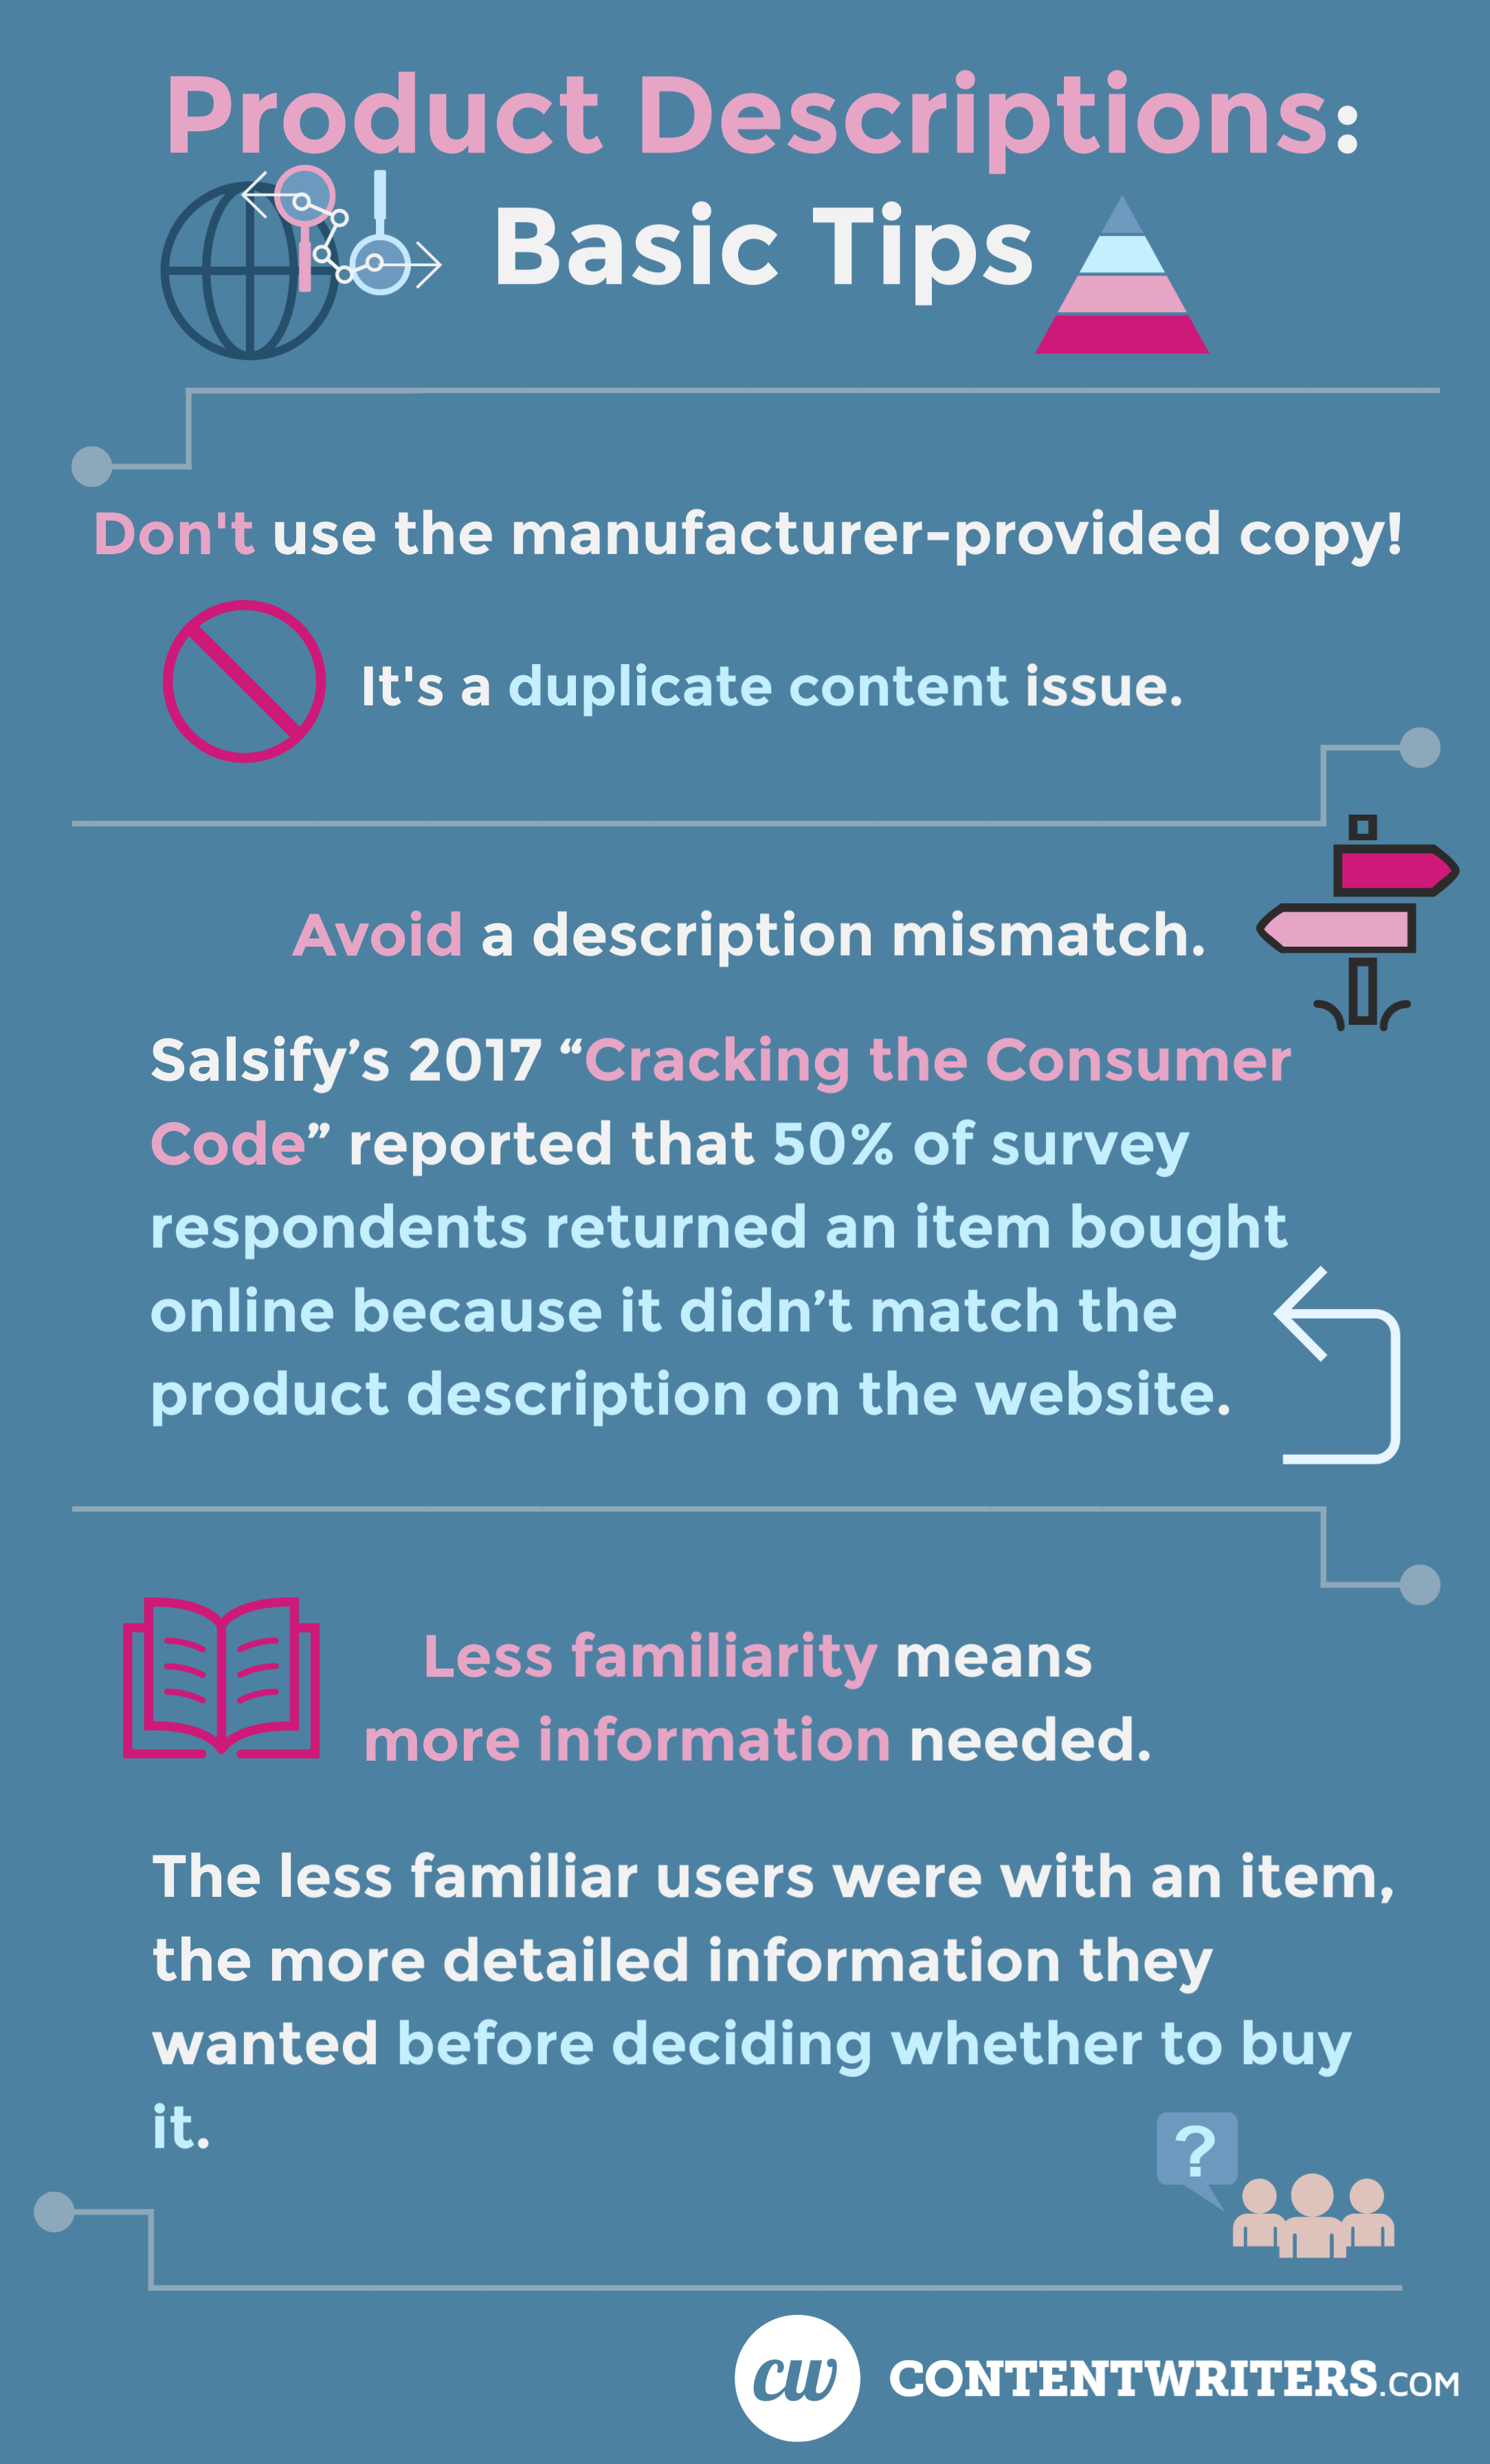 Product Descriptions Basic Tips ContentWriters

Don't use the manufacturer-provided copy!

It's a duplicate content issue.

Avoid a description mismatch.

Salsify's 2017 "Cracking the Consumer" reported that 50% of survey respondents returned an item bought online because it didn't match the product description on the website

Less familiarity means more information needed

The less familiar users were with an item, the more detailed information they wanted before deciding whether to buy it